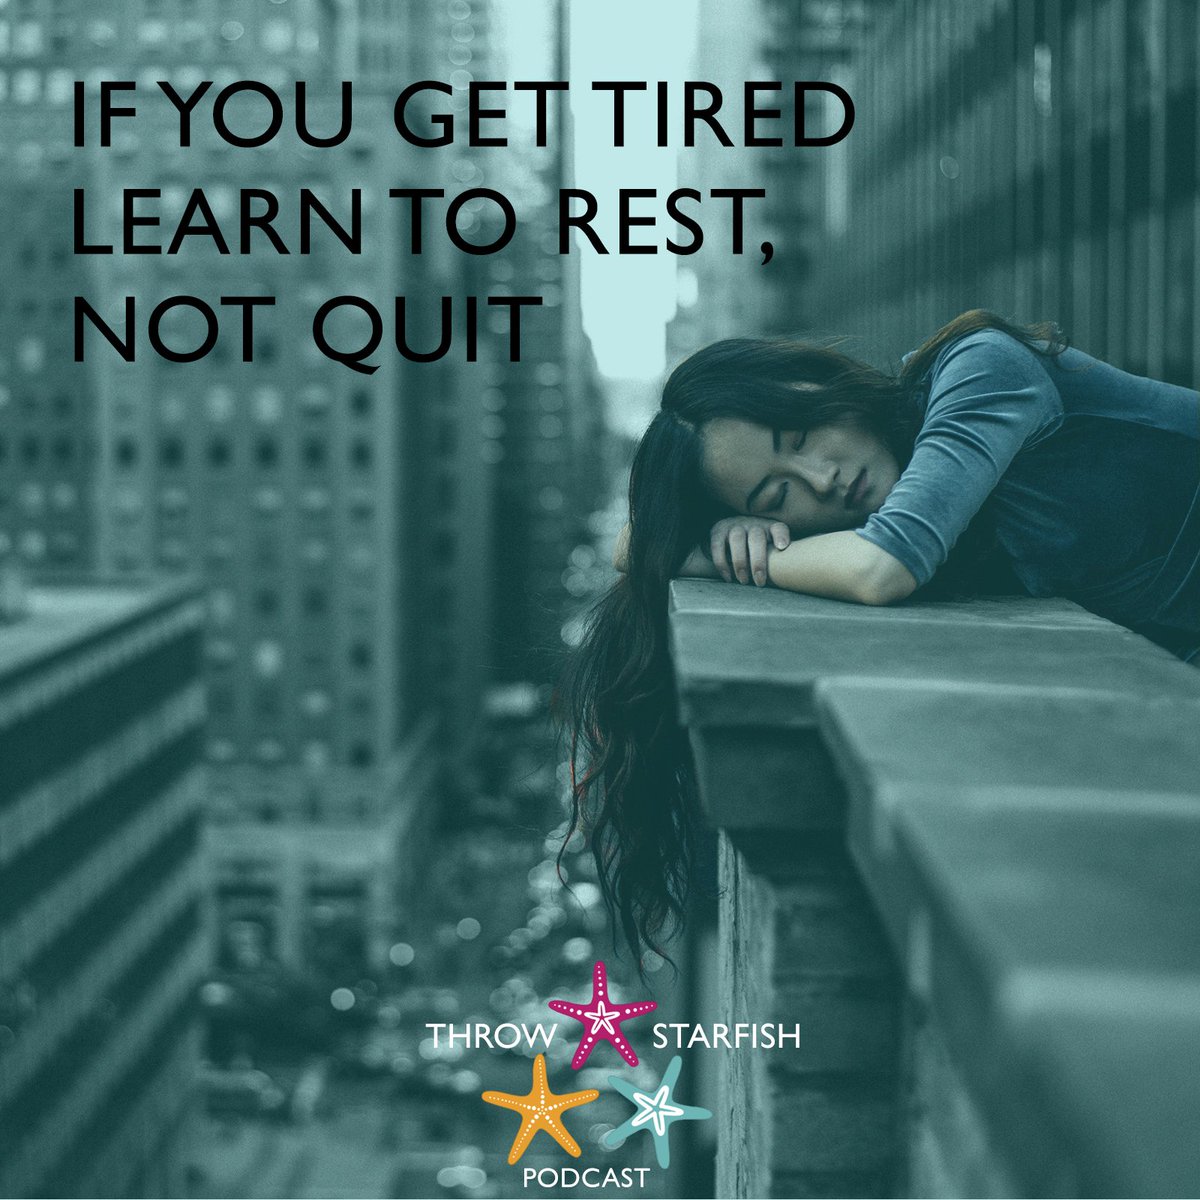 If you get tired learn to rest, not quit.
You can #Listen to episodes of our #Podcast at throwstarfish.com #ThrowStarfish